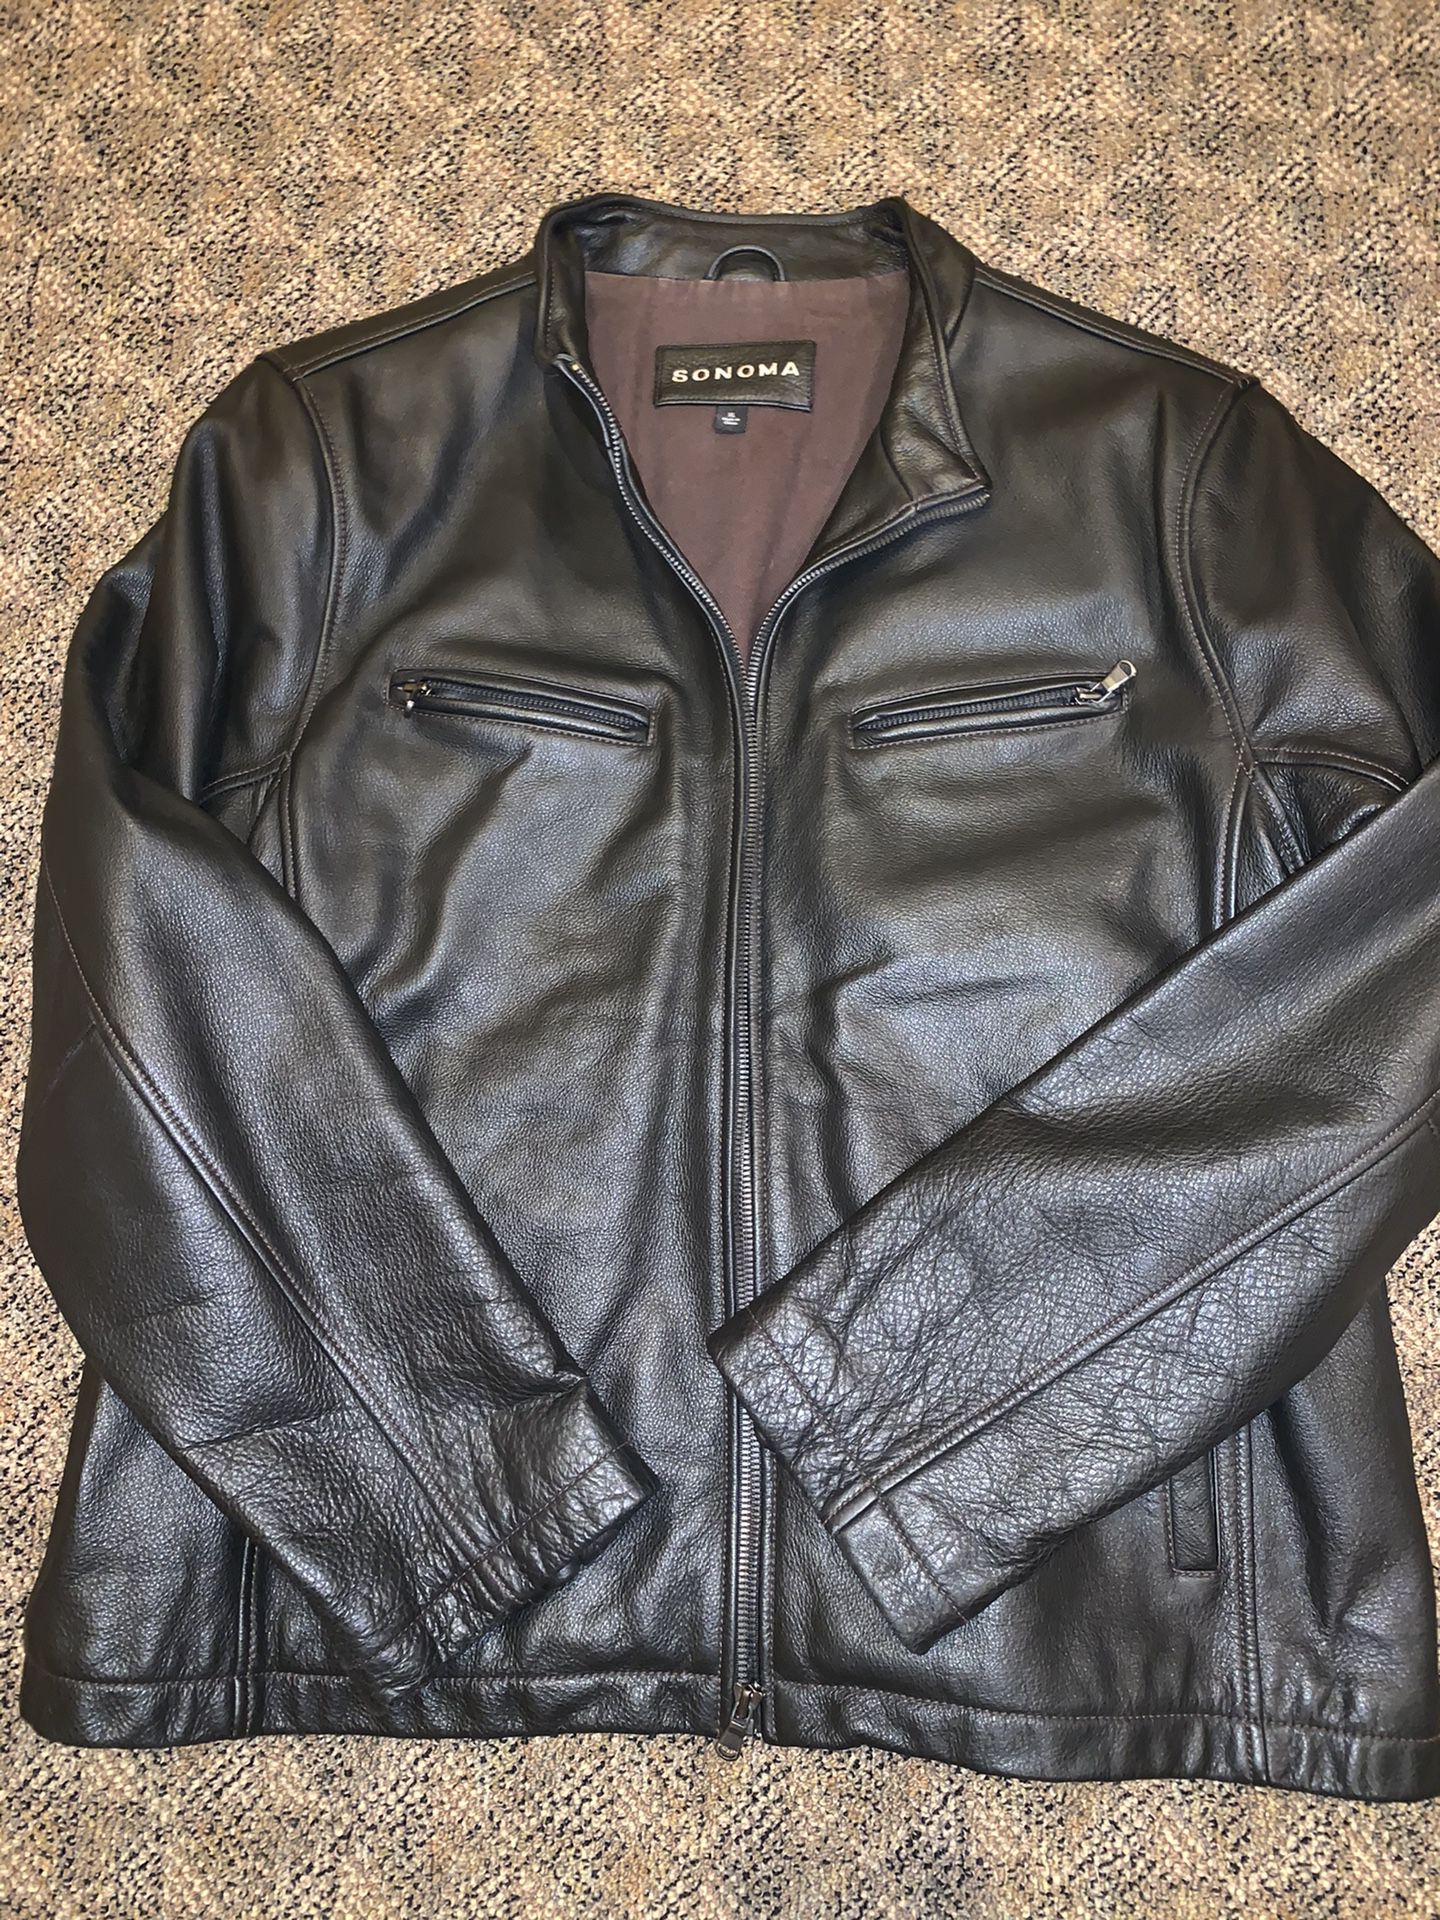 Sonoma Leather jacket for Sale in Park Ridge, IL - OfferUp